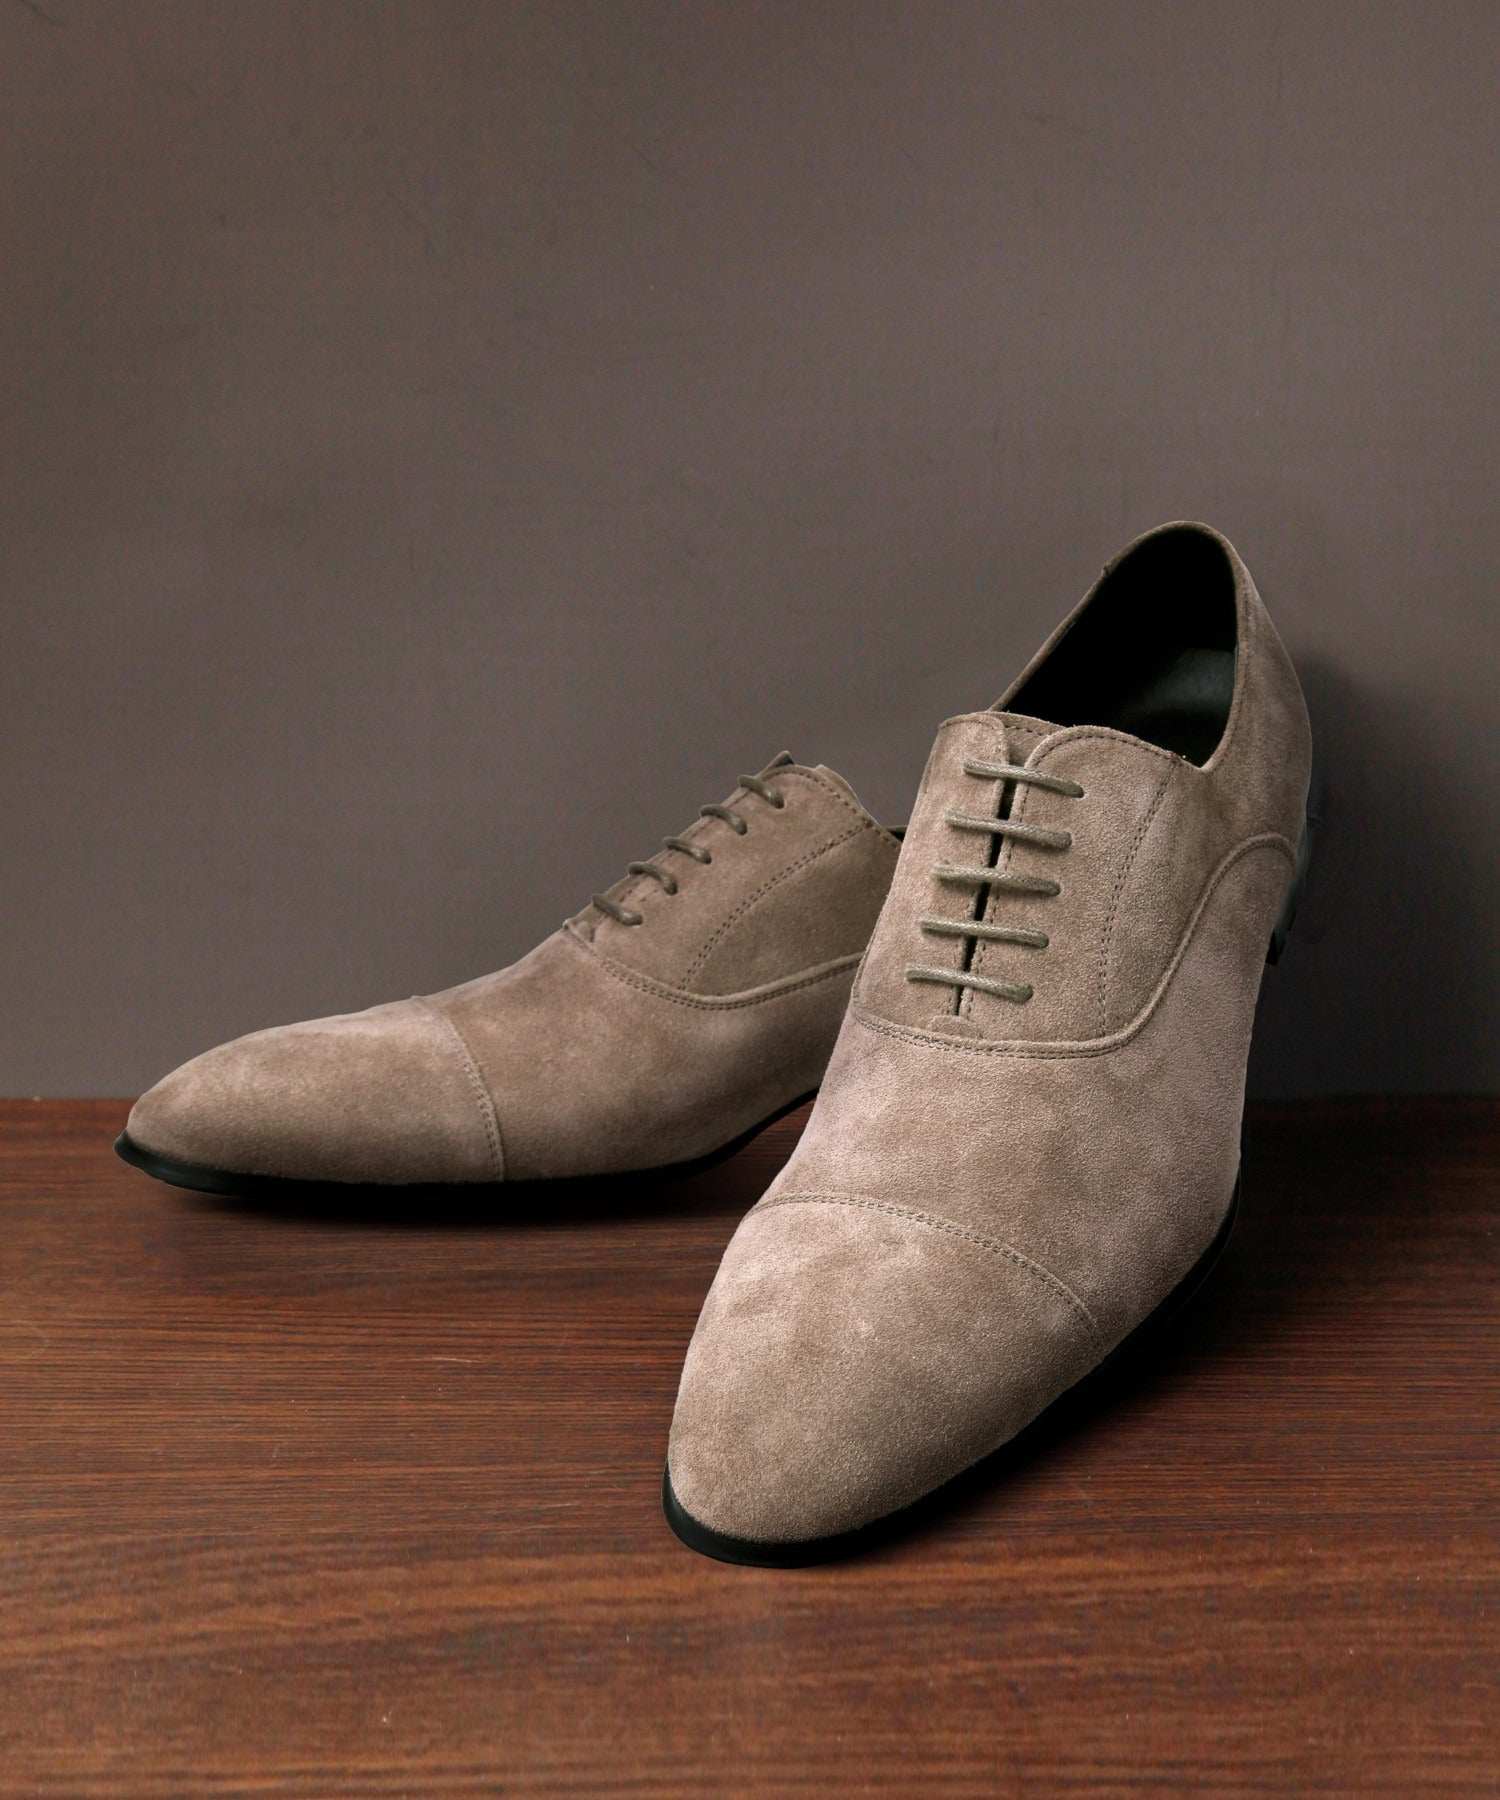 GUIONNET】BUSINESS SHOES STRAIGHT TIP BS201 ビジネスシューズ